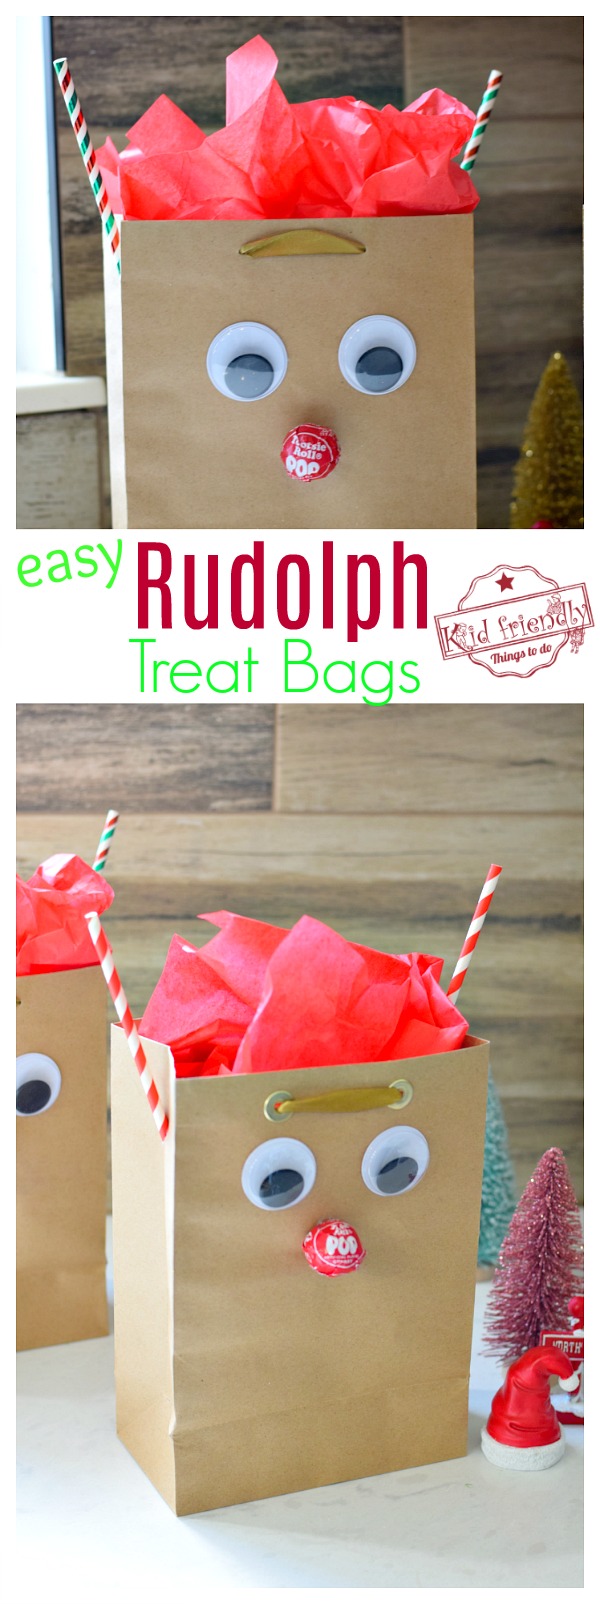 making Rudolph Treat Bags